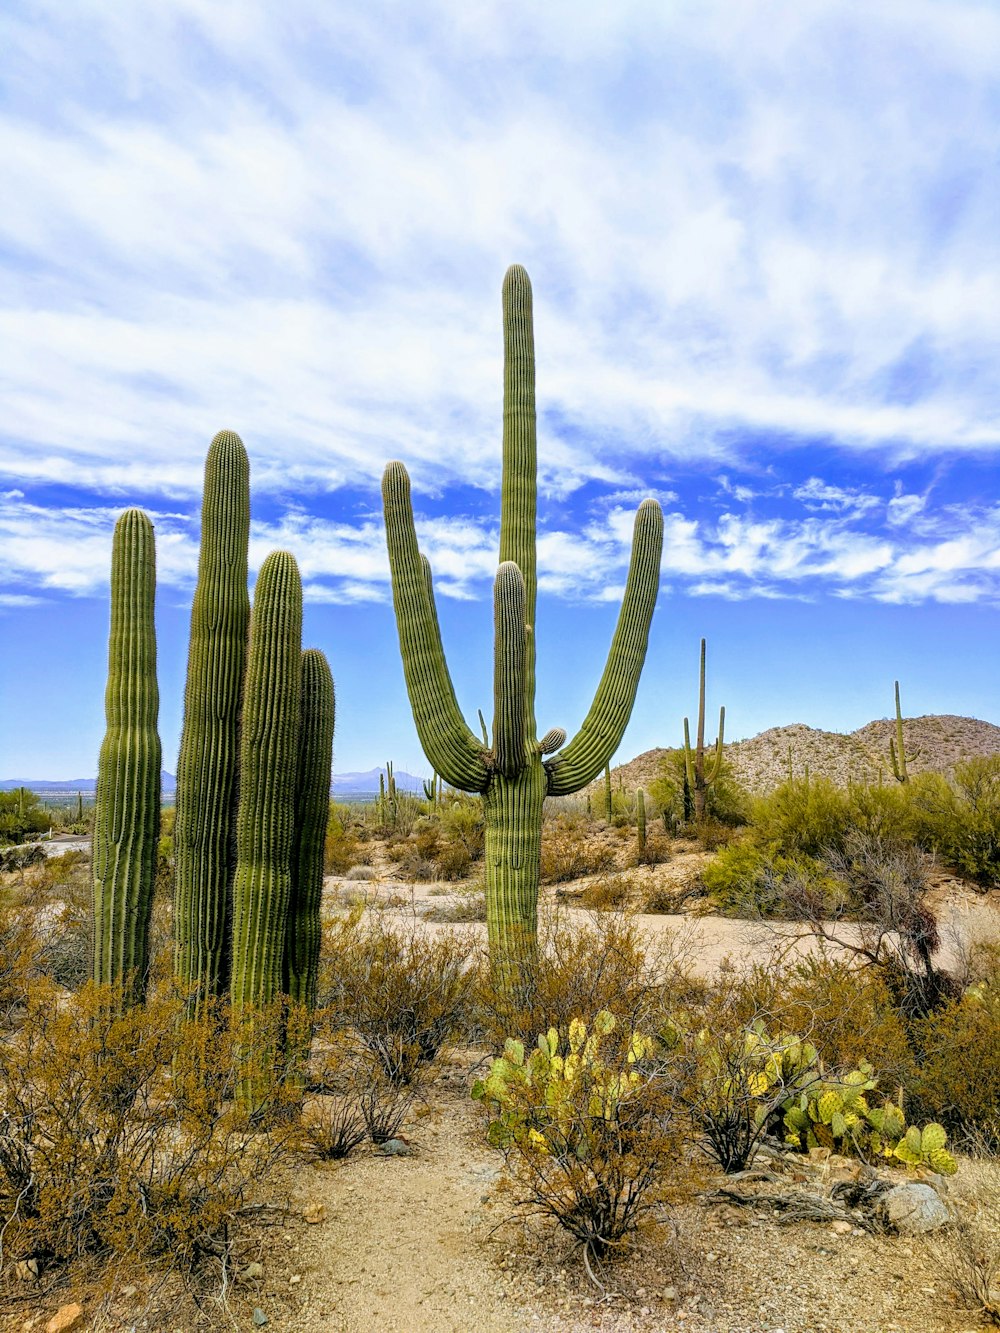 cactus plants on brown field under blue sky during daytime